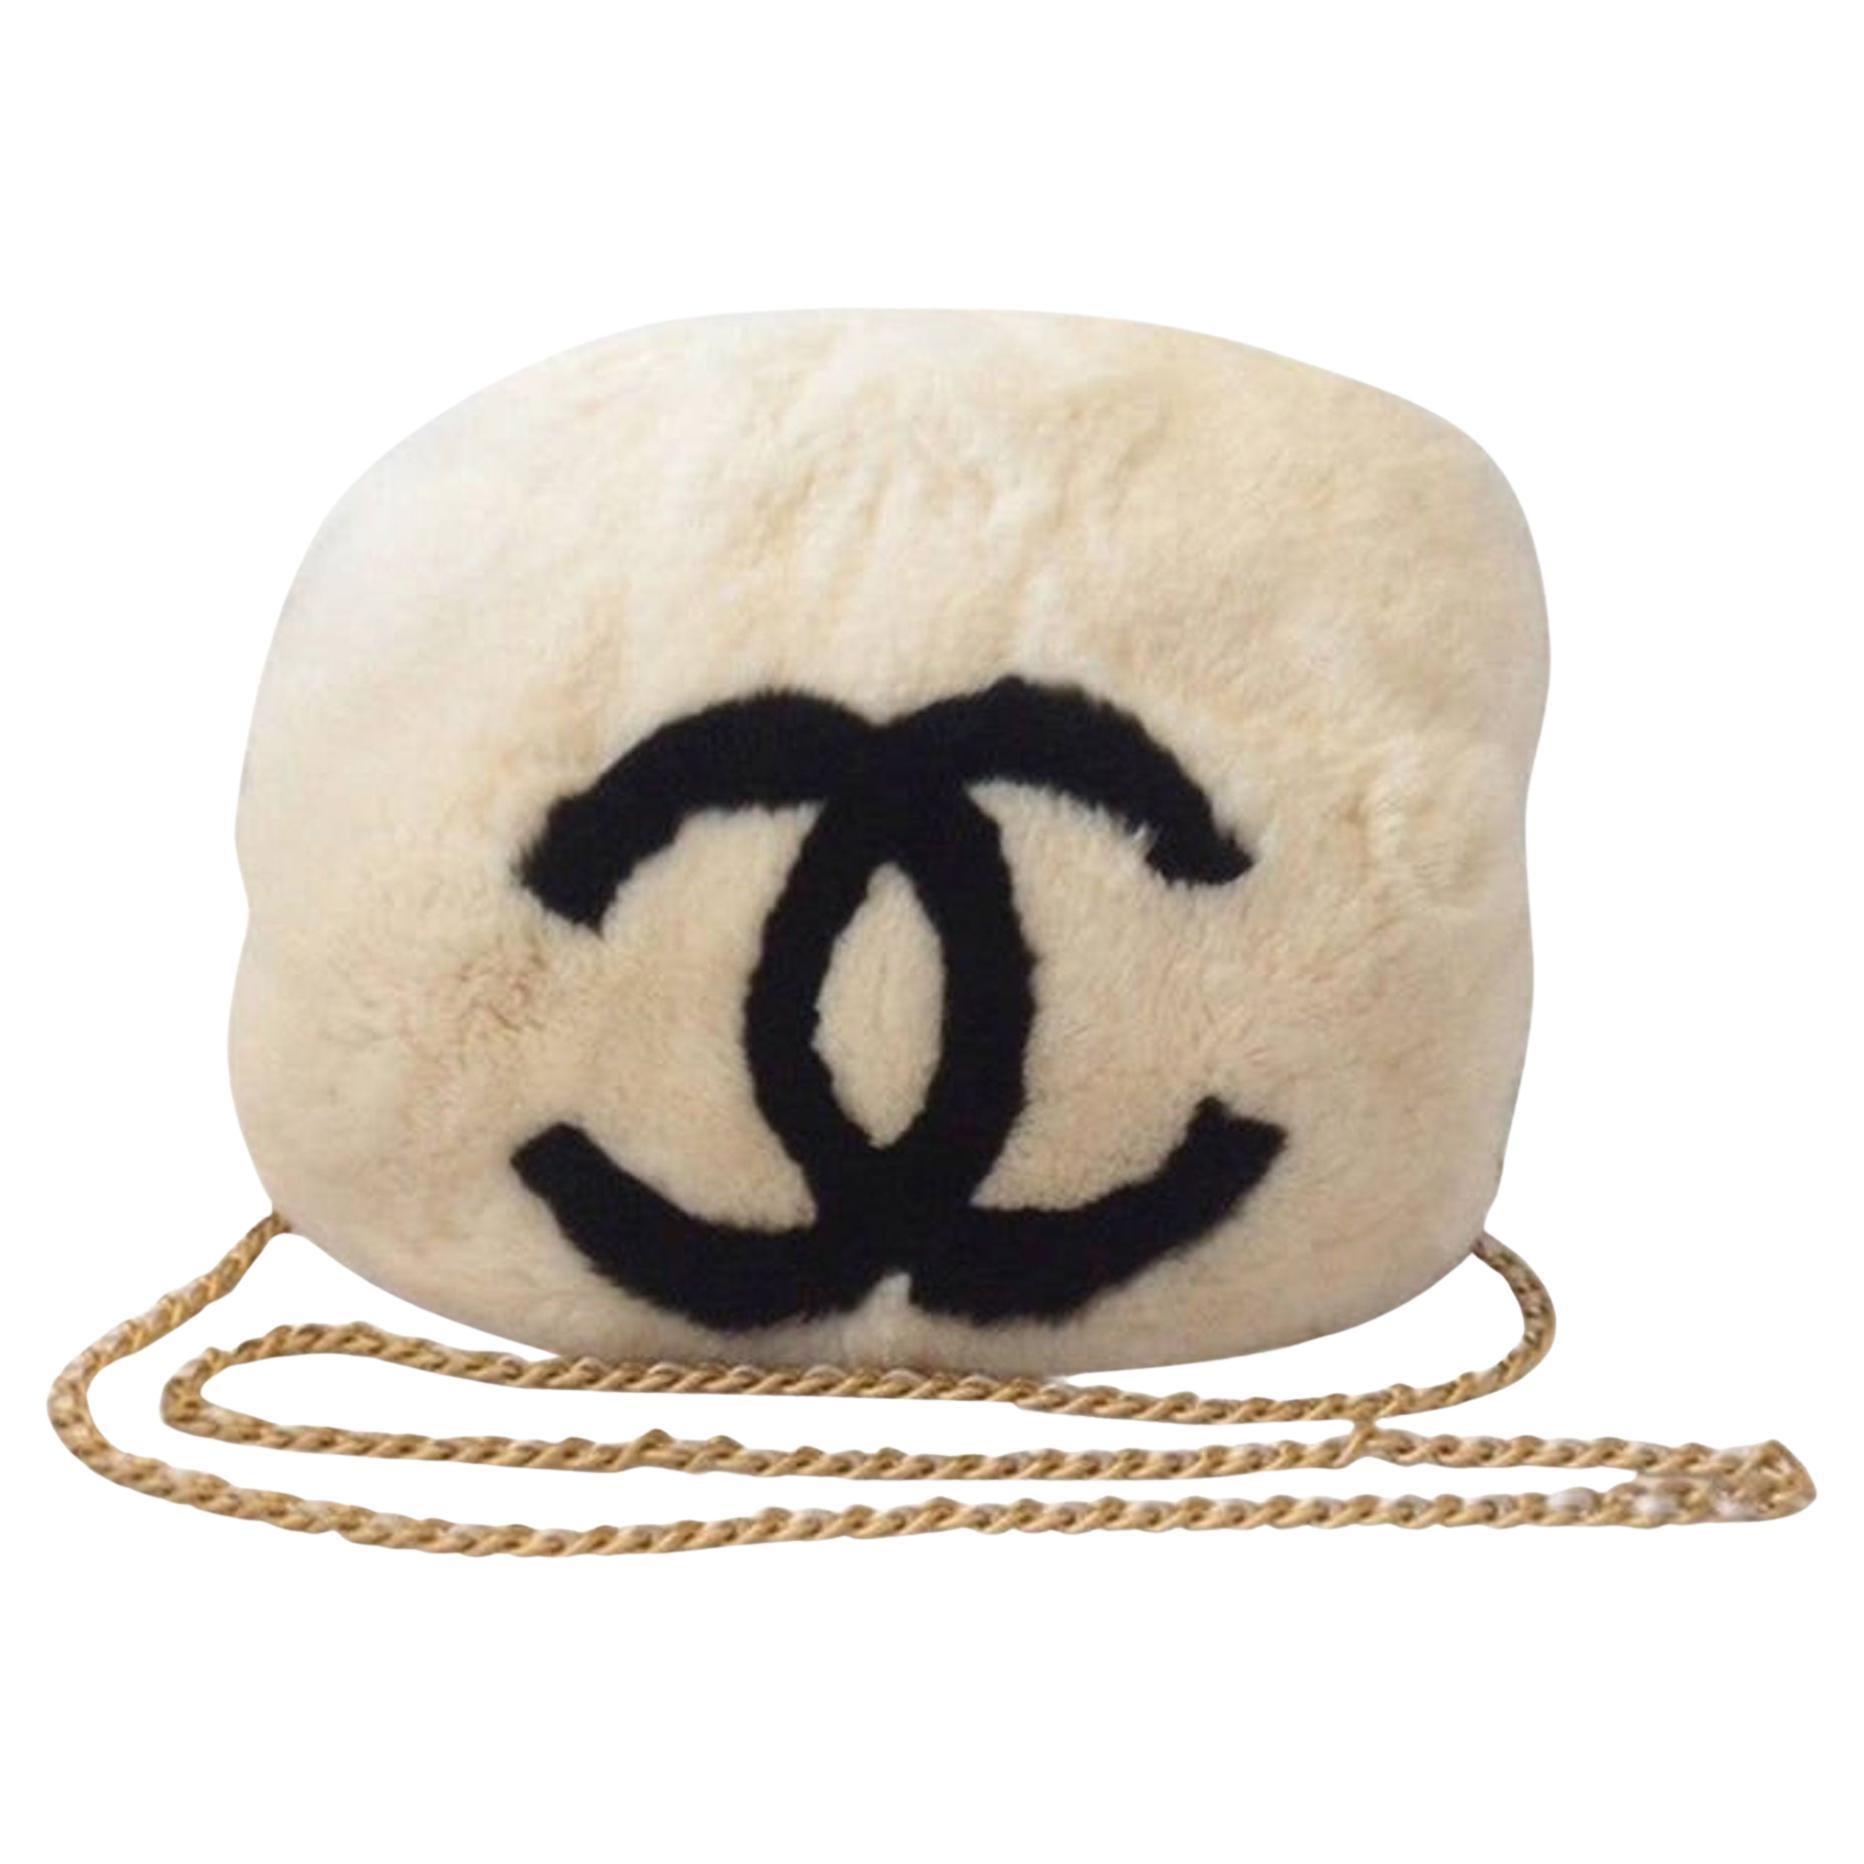 Chanel' White CC Rabbit Muff

CC Logo
Gold hardware
Detachable brushed-gold interwoven chain
White rabbit fur
Filled with down
Black satin lining
Chain drop: 19